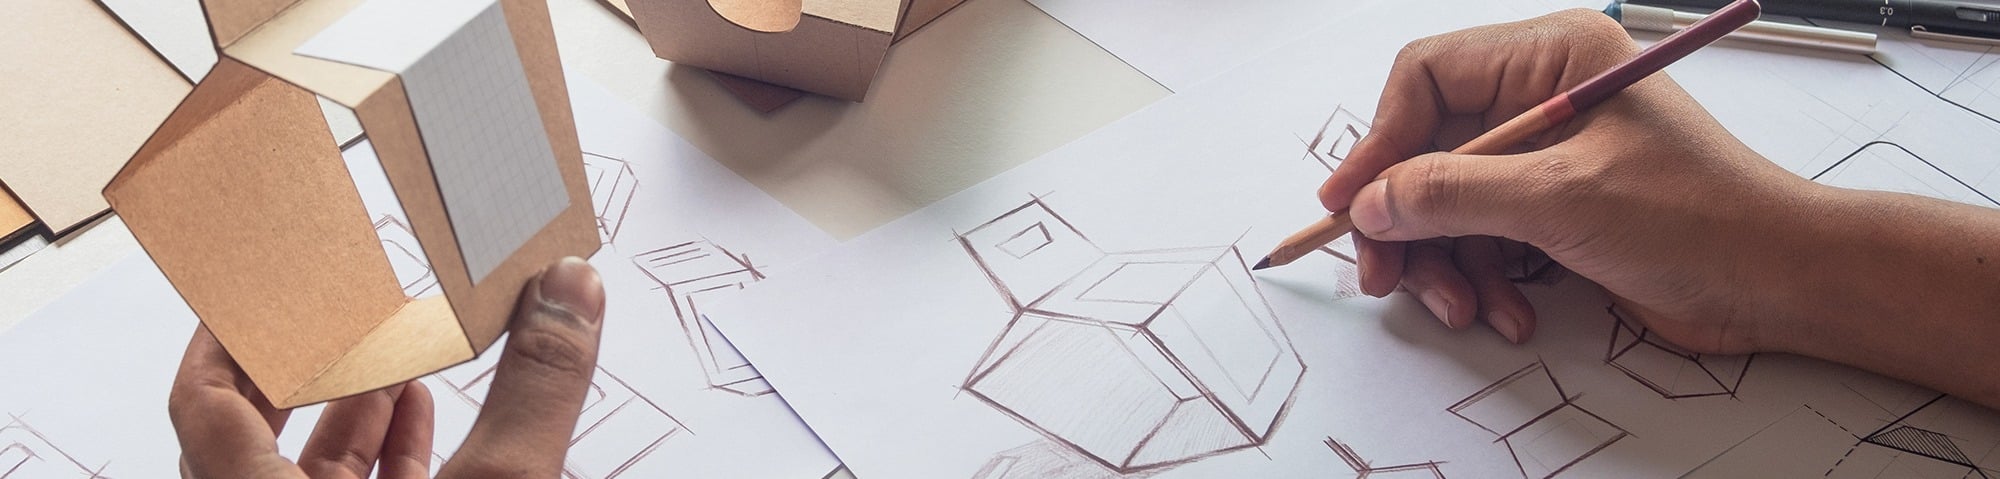 A Quick Guide to Effective Packaging Design